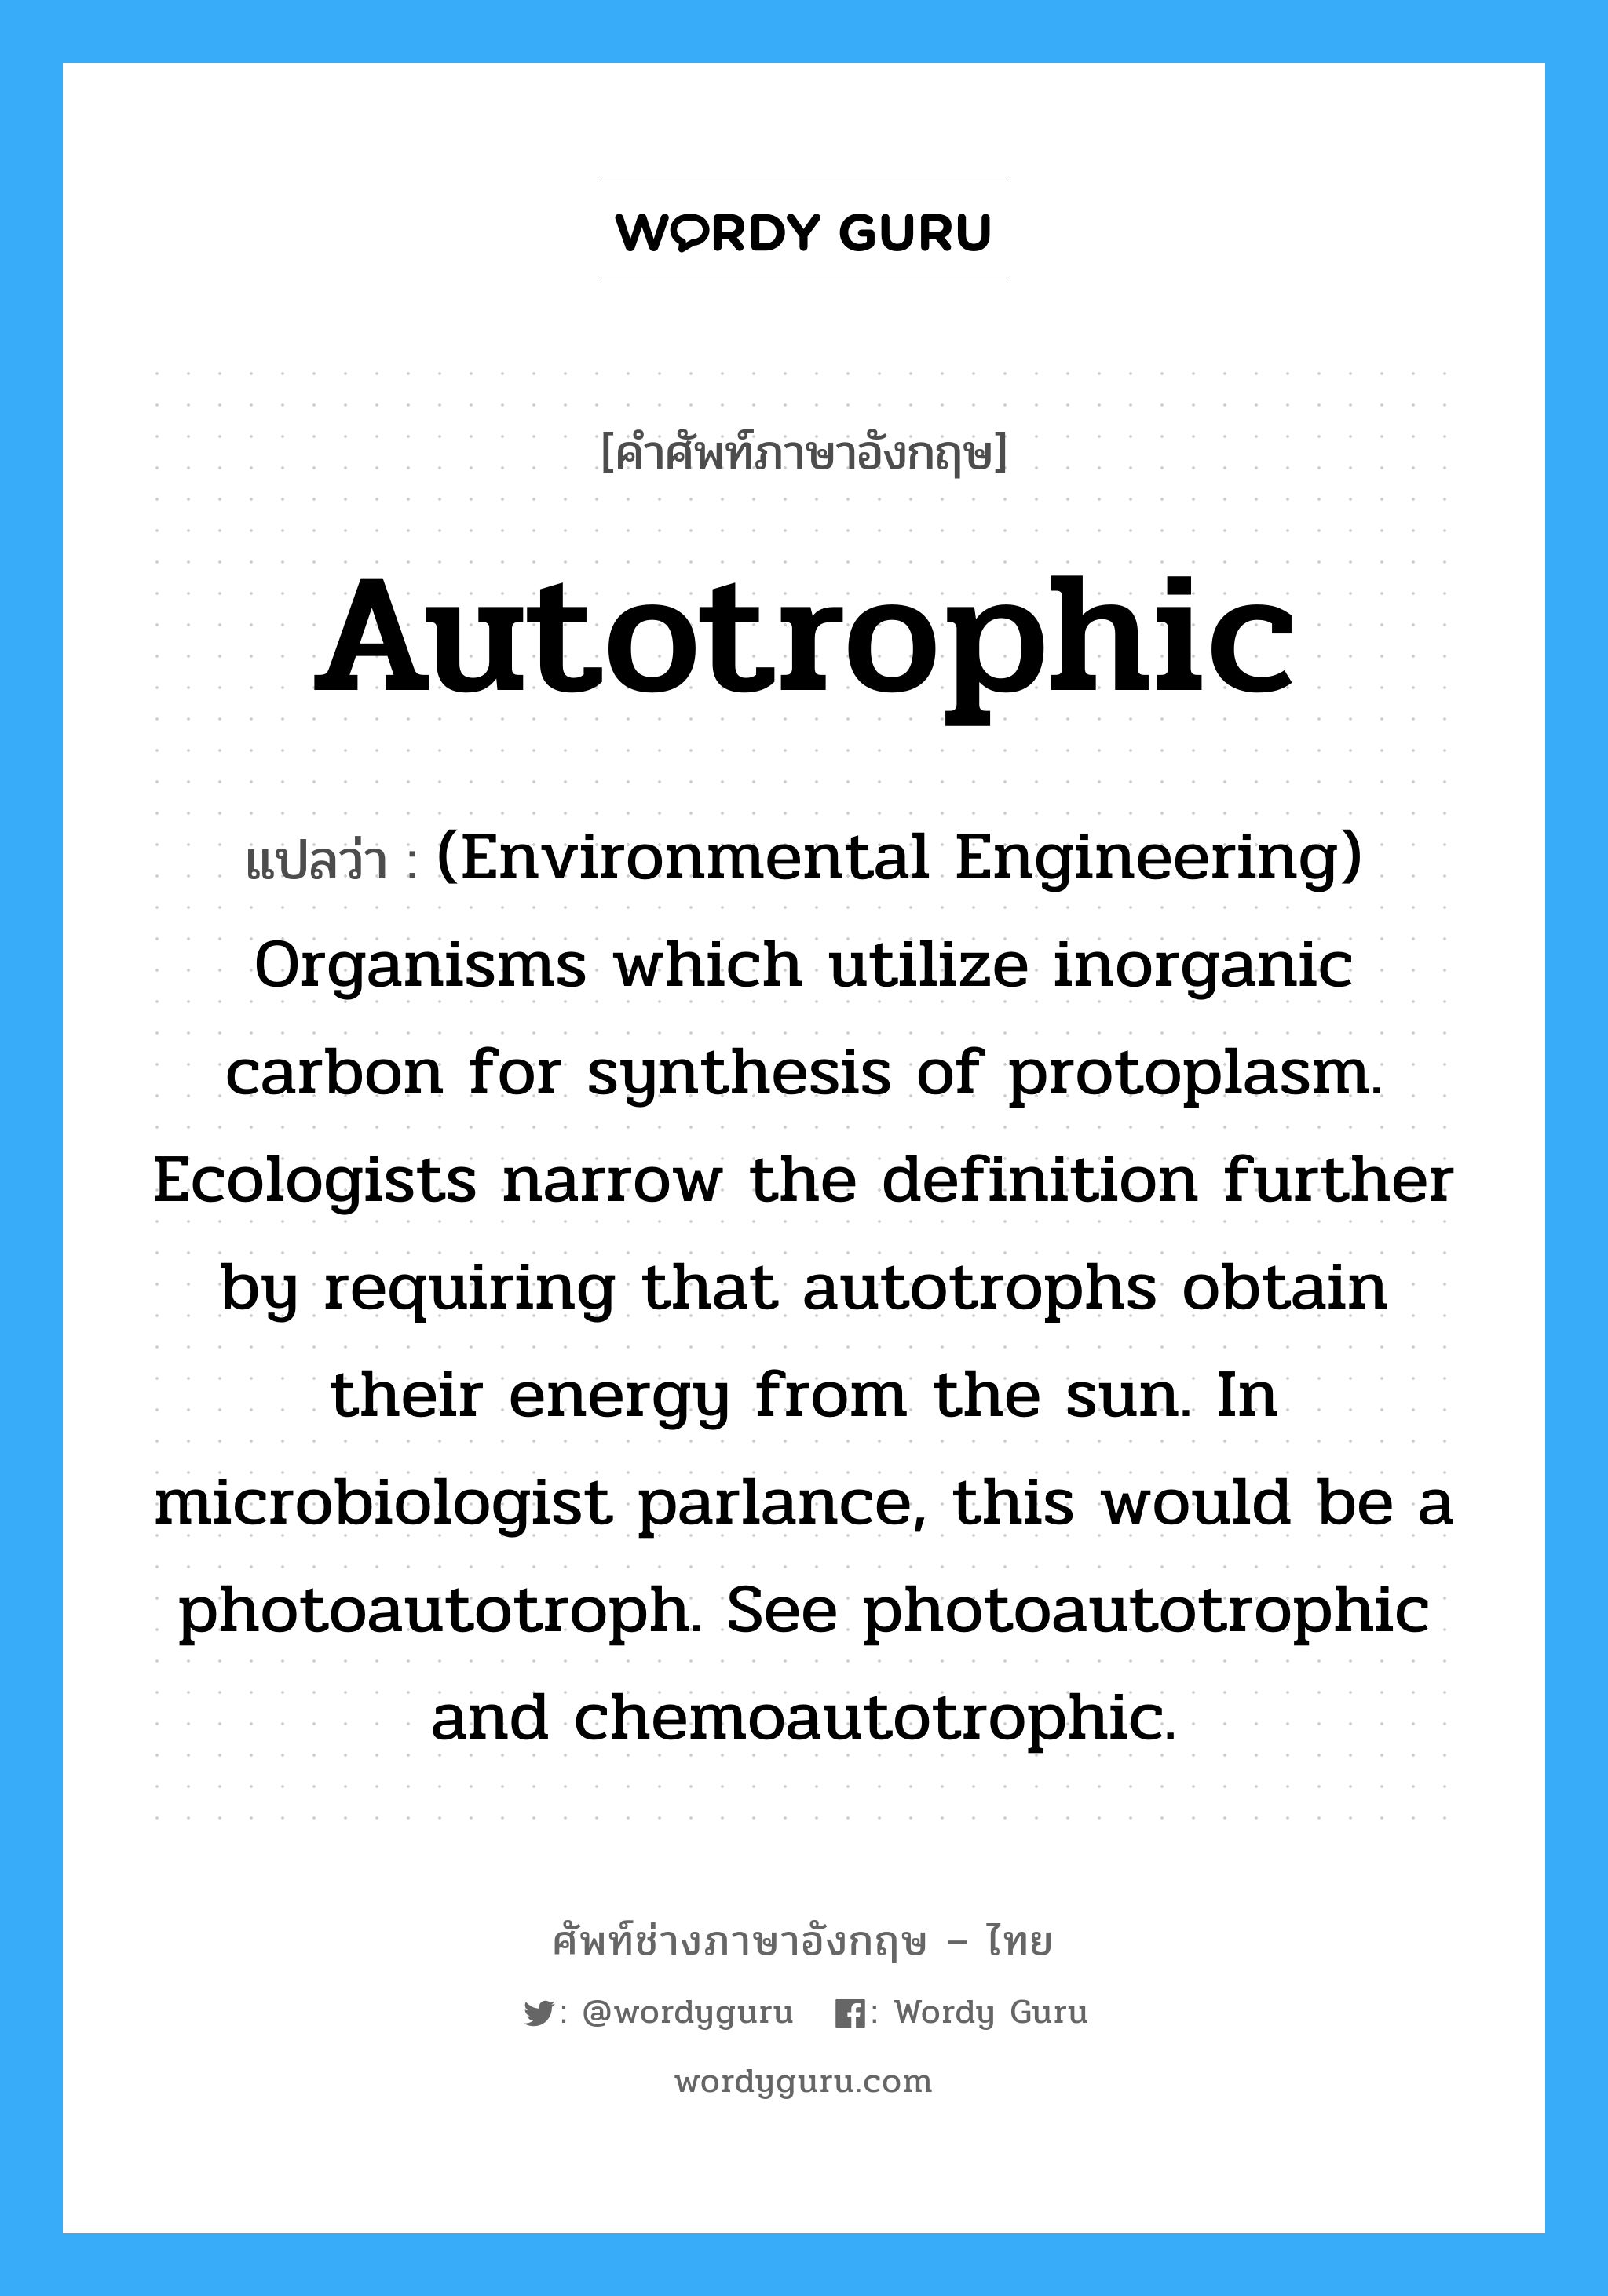 Autotrophic แปลว่า?, คำศัพท์ช่างภาษาอังกฤษ - ไทย Autotrophic คำศัพท์ภาษาอังกฤษ Autotrophic แปลว่า (Environmental Engineering) Organisms which utilize inorganic carbon for synthesis of protoplasm. Ecologists narrow the definition further by requiring that autotrophs obtain their energy from the sun. In microbiologist parlance, this would be a photoautotroph. See photoautotrophic and chemoautotrophic.